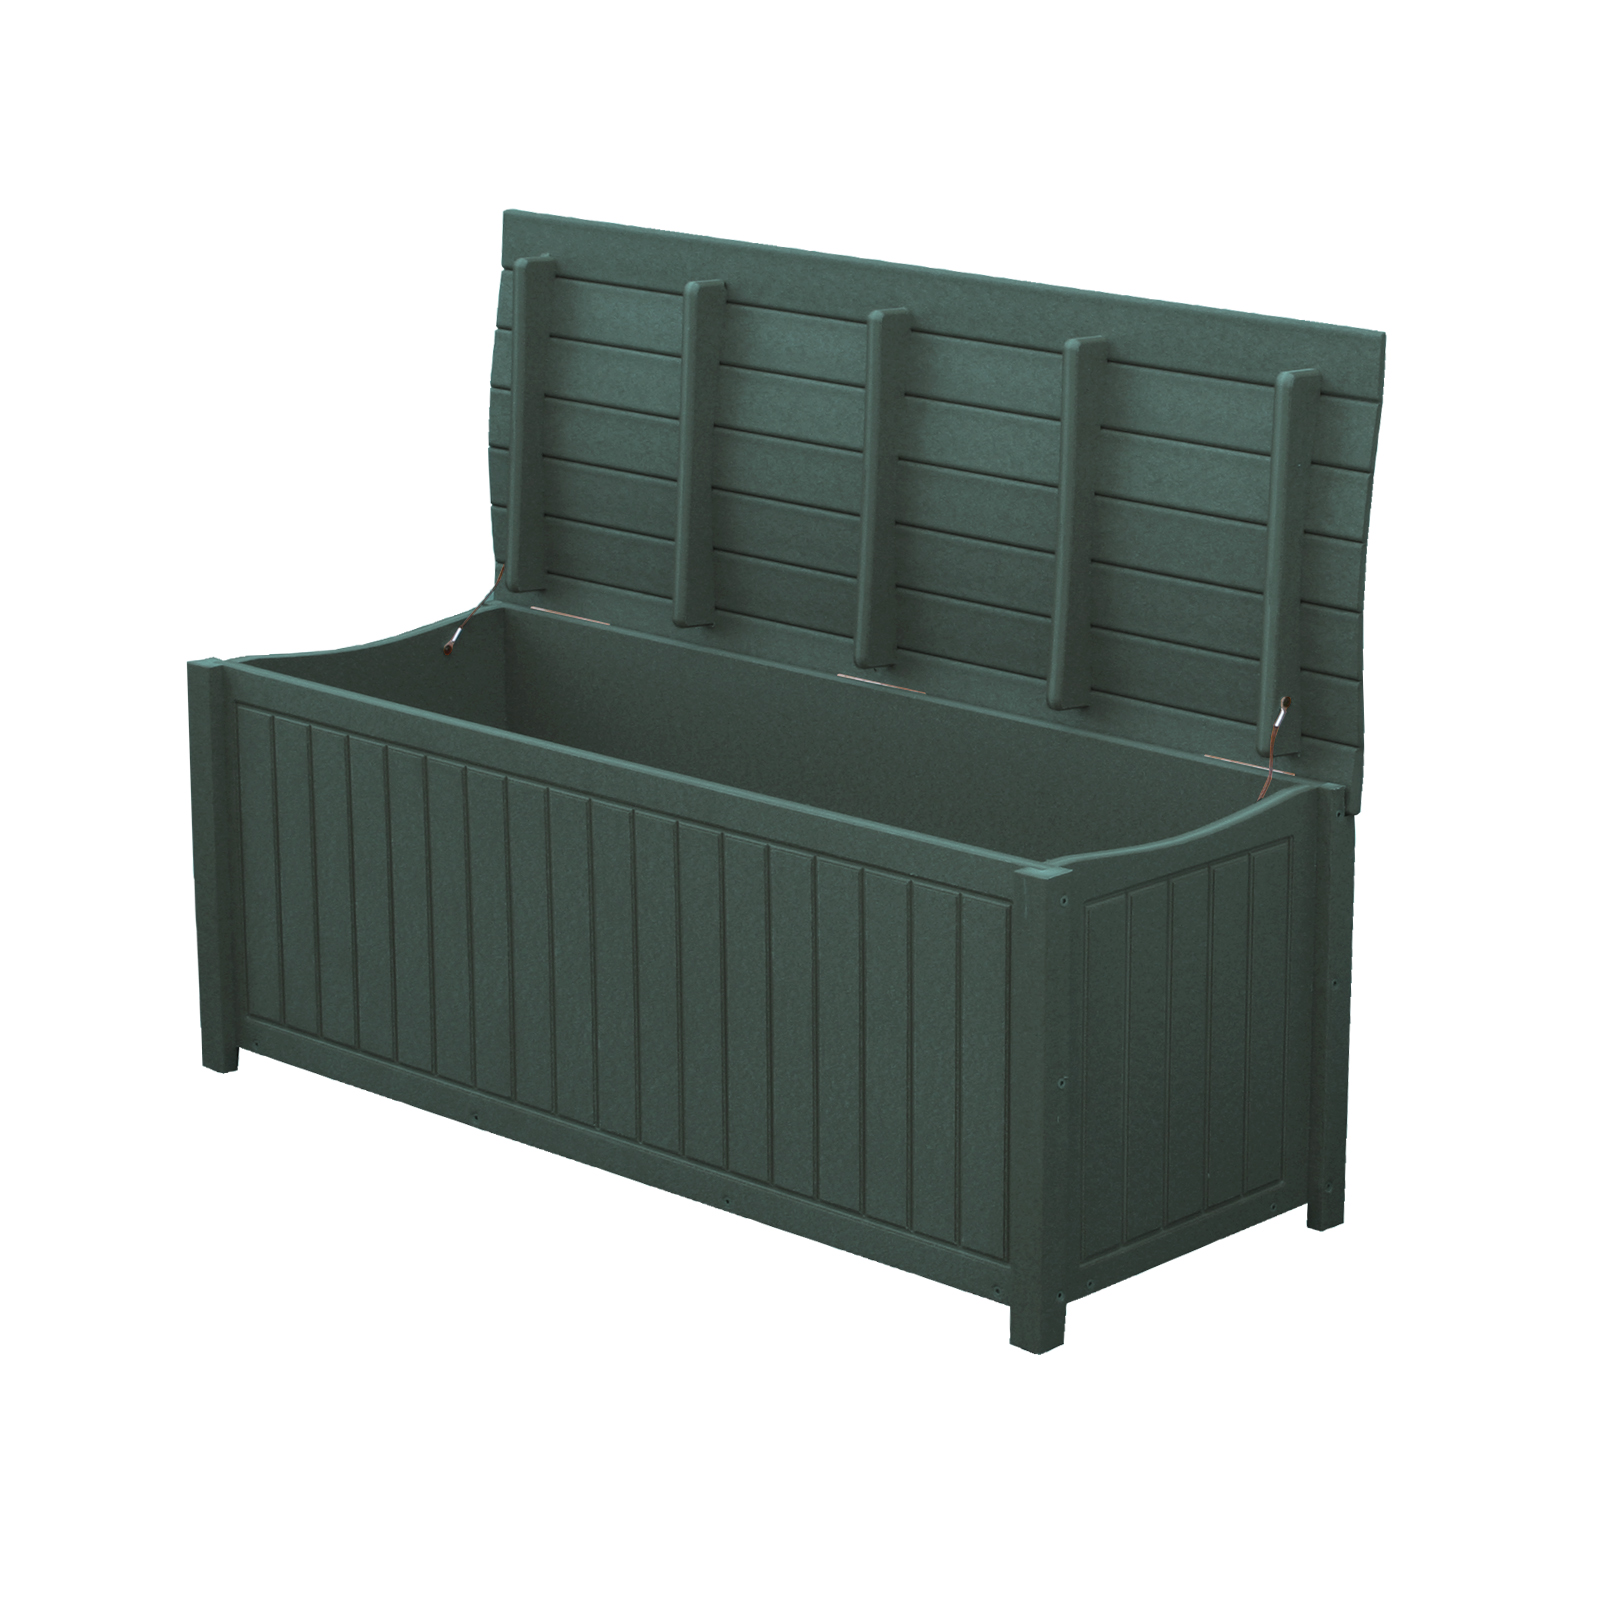 Brisbane Curved Top Commercial Grade Deck Box, Green